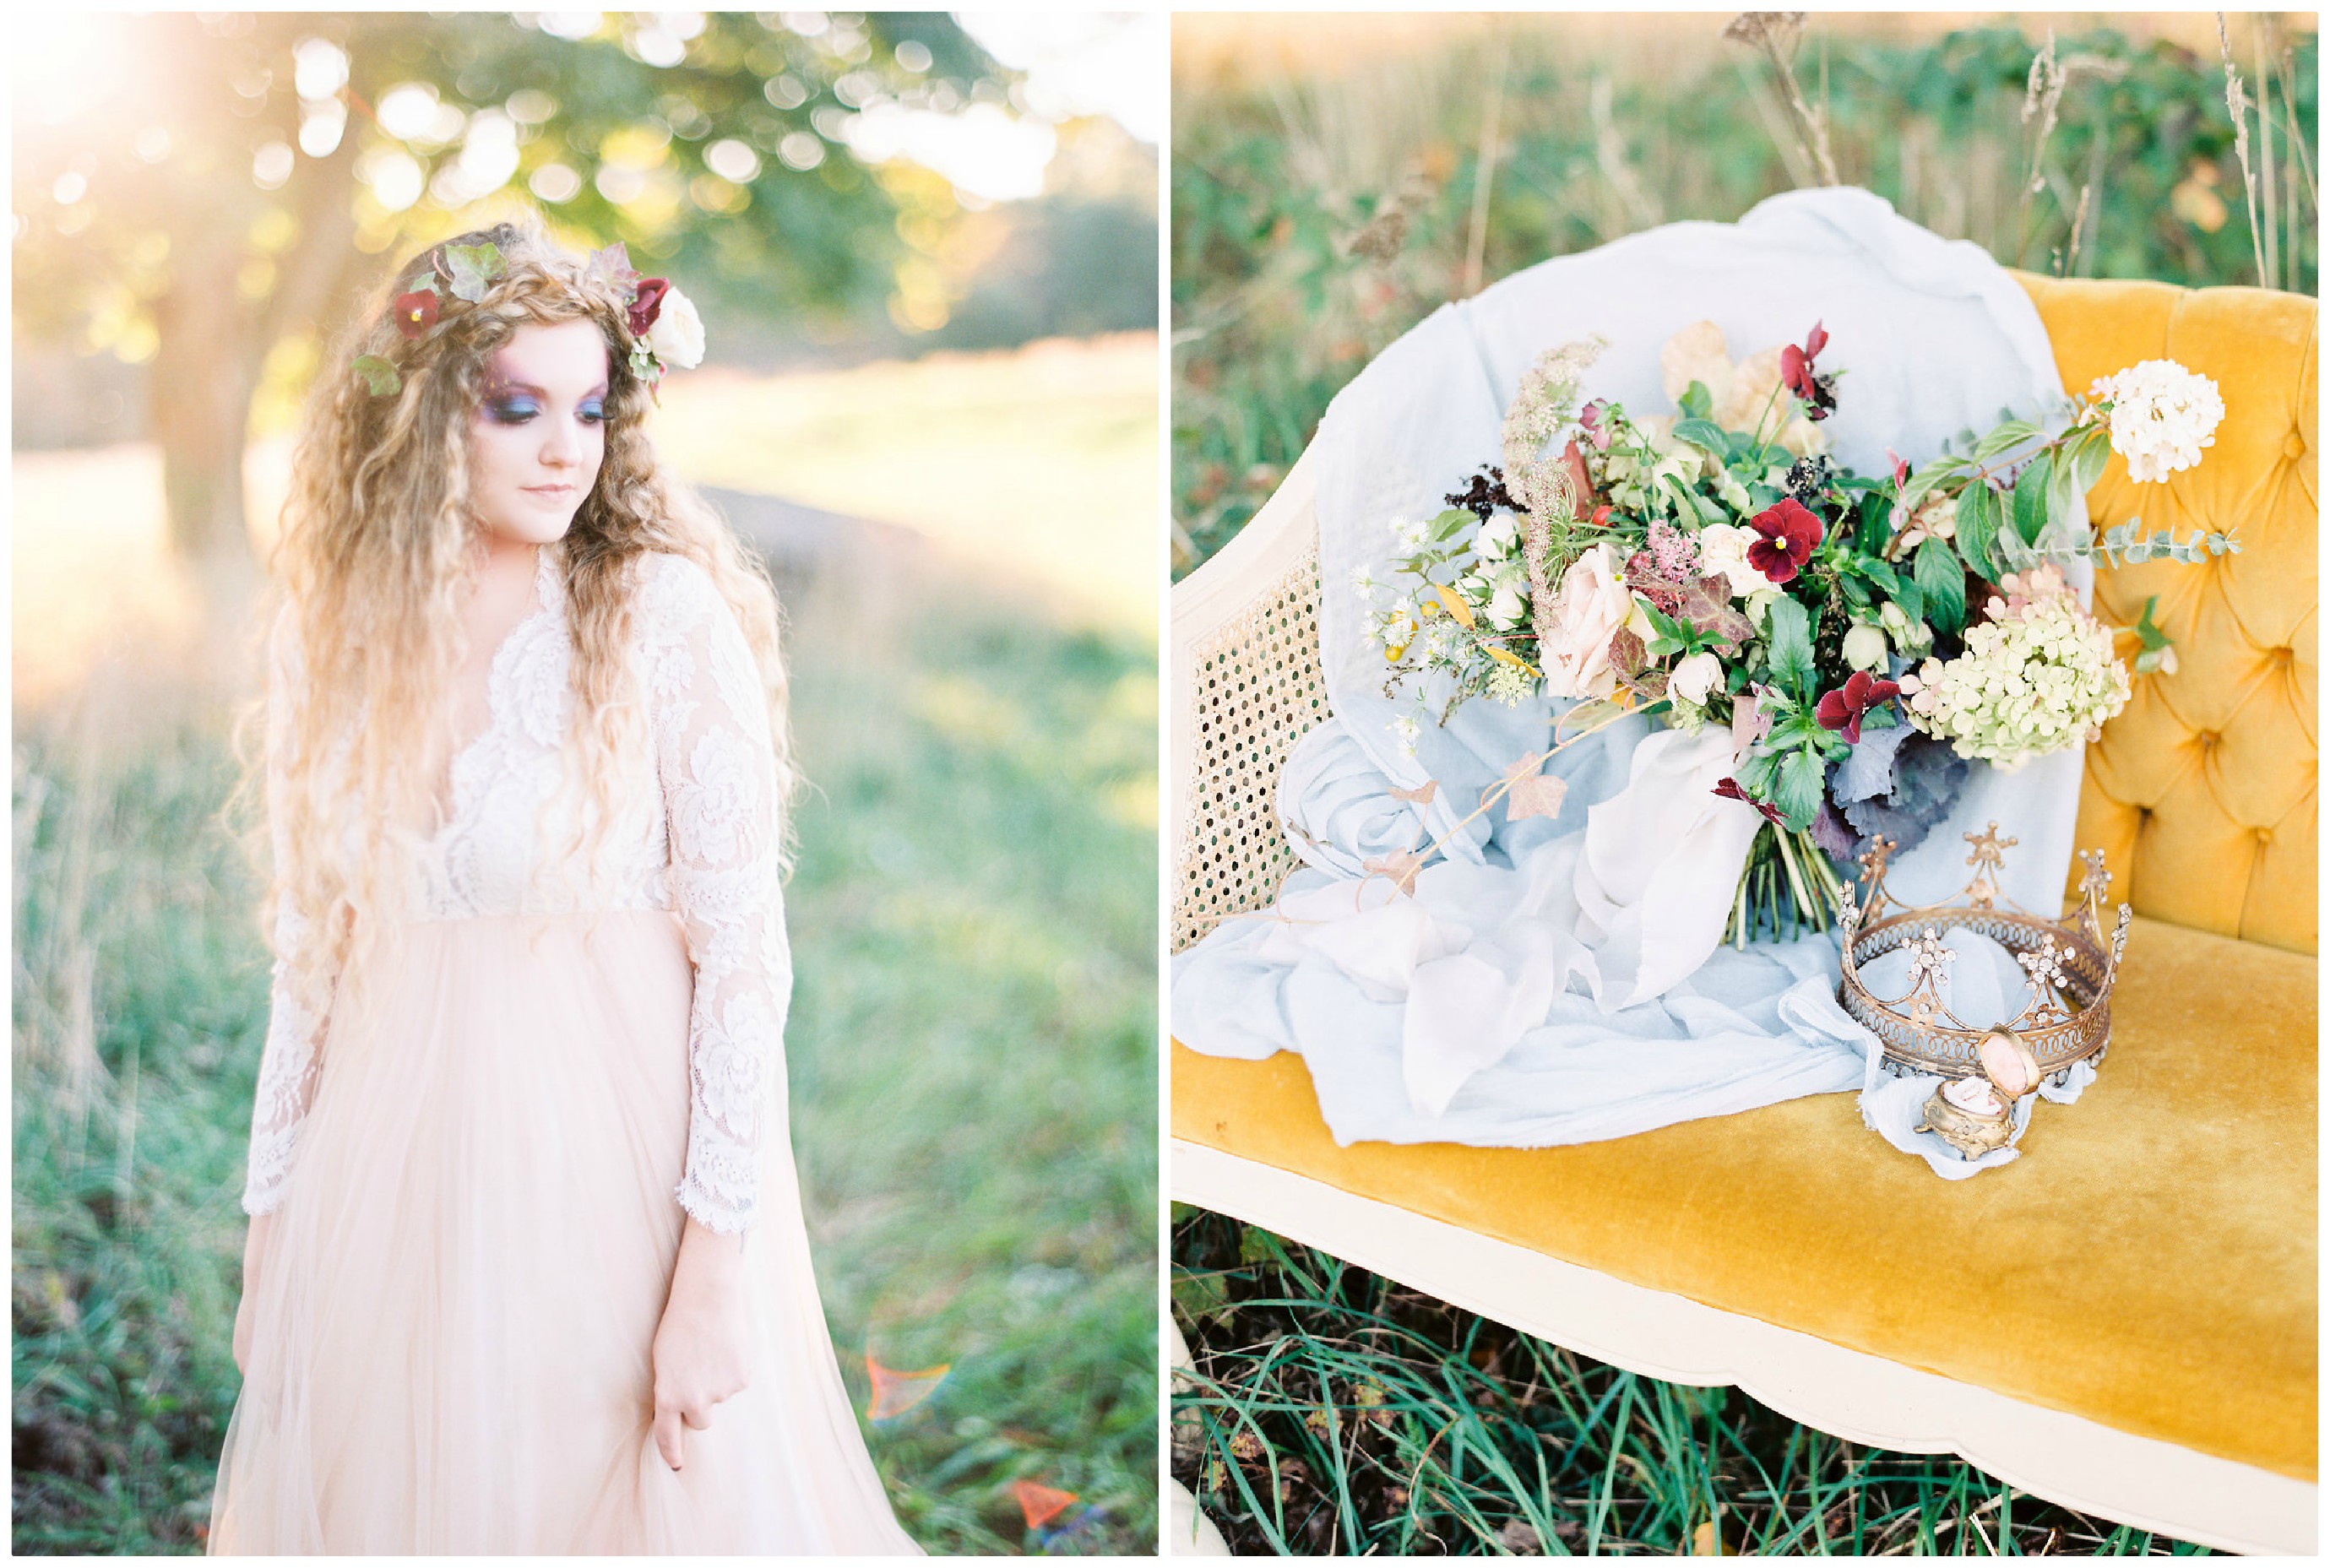 Fall Wedding Flowers | The Day's Design | Ashley Slater Photography